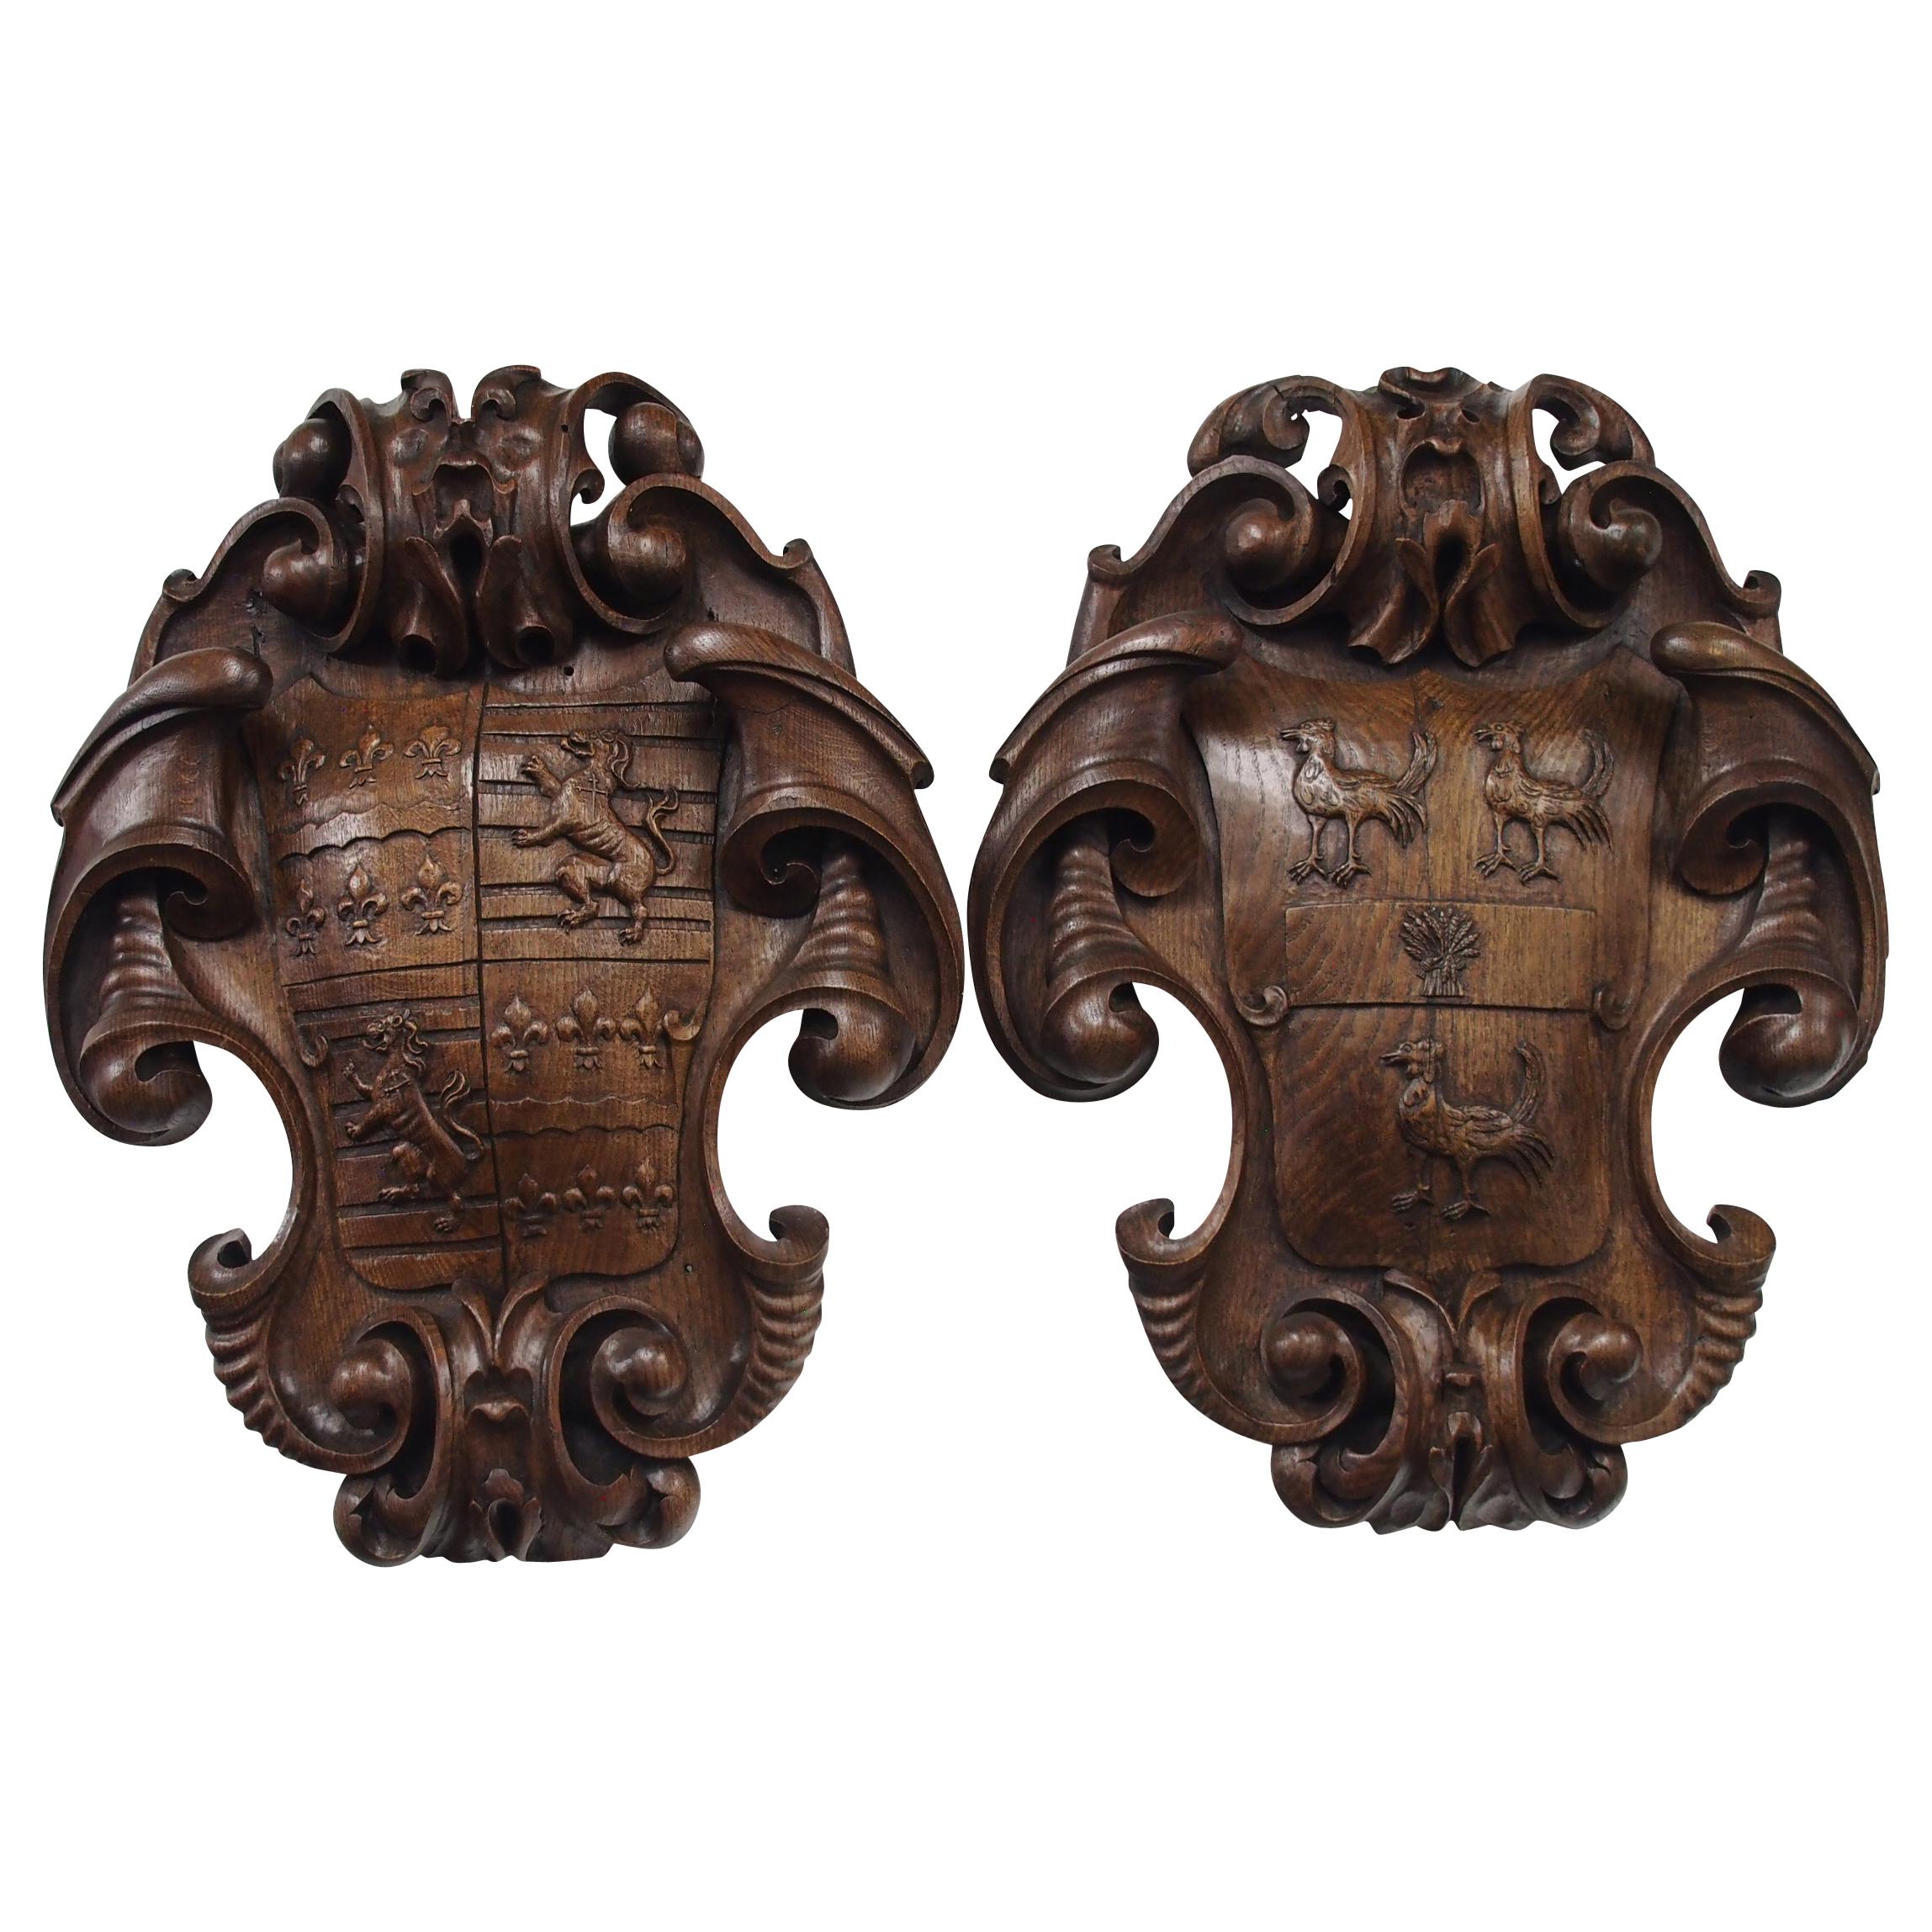 Victorian Carved Shield Plaques, circa 1860